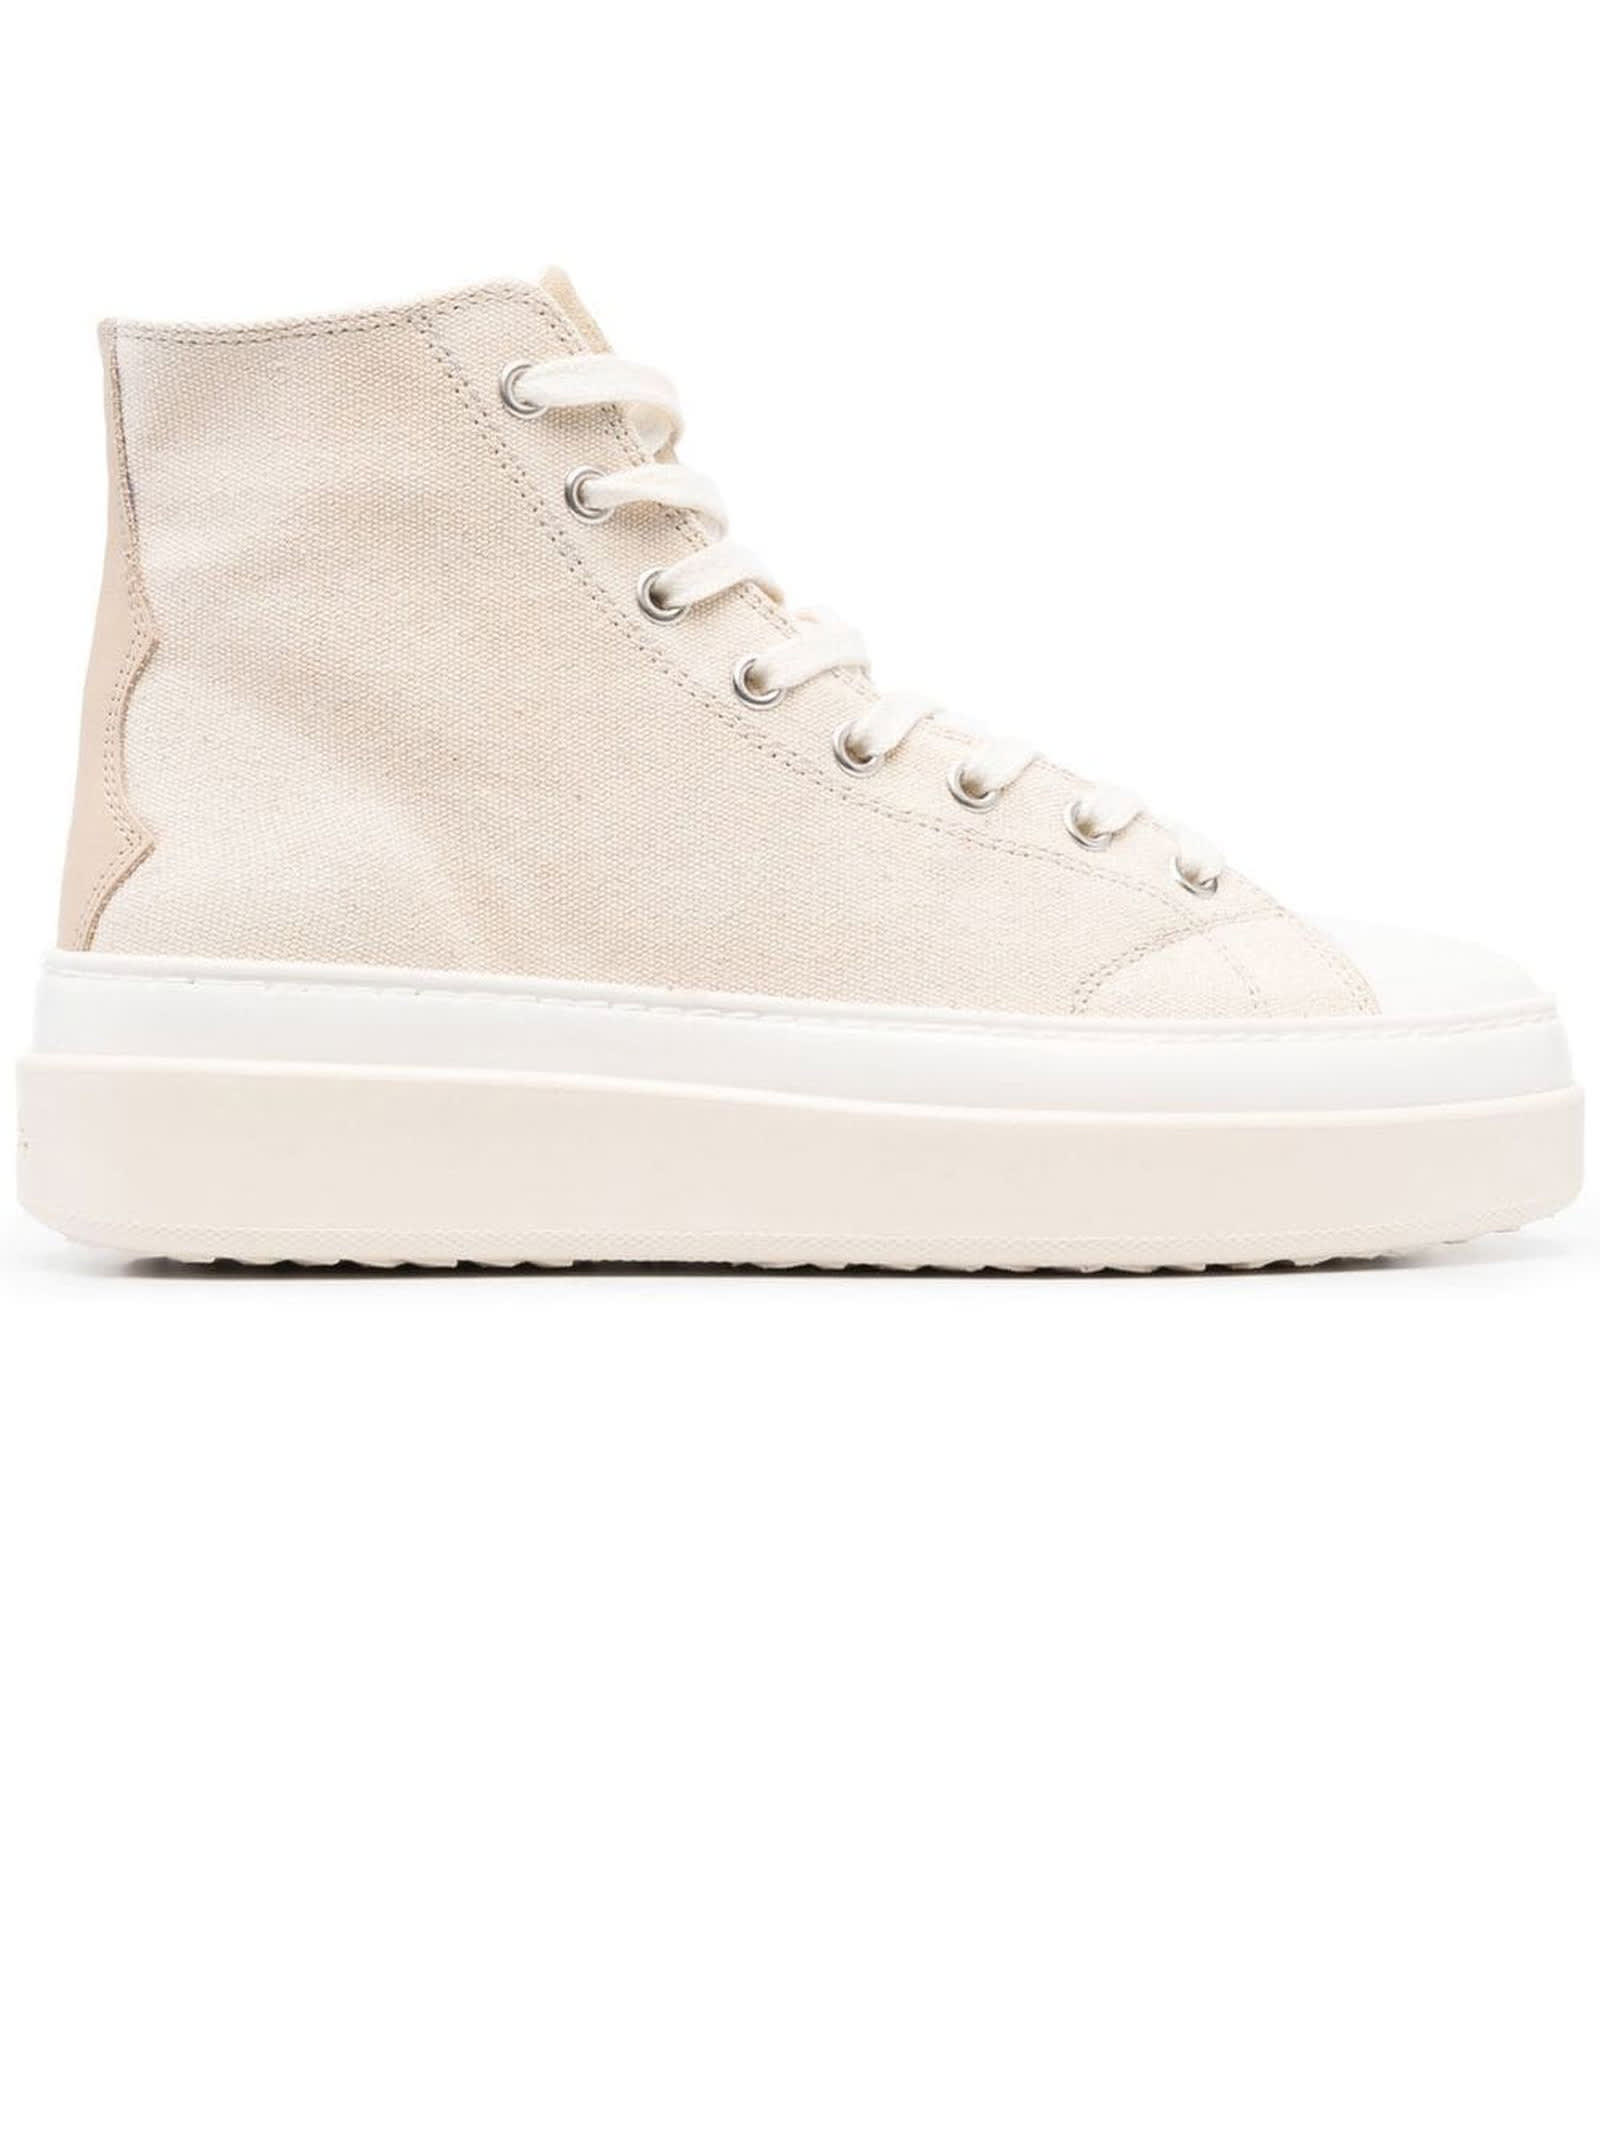 ISABEL MARANT BEIGE LACE-UP HIGH-TOP SNEAKERS